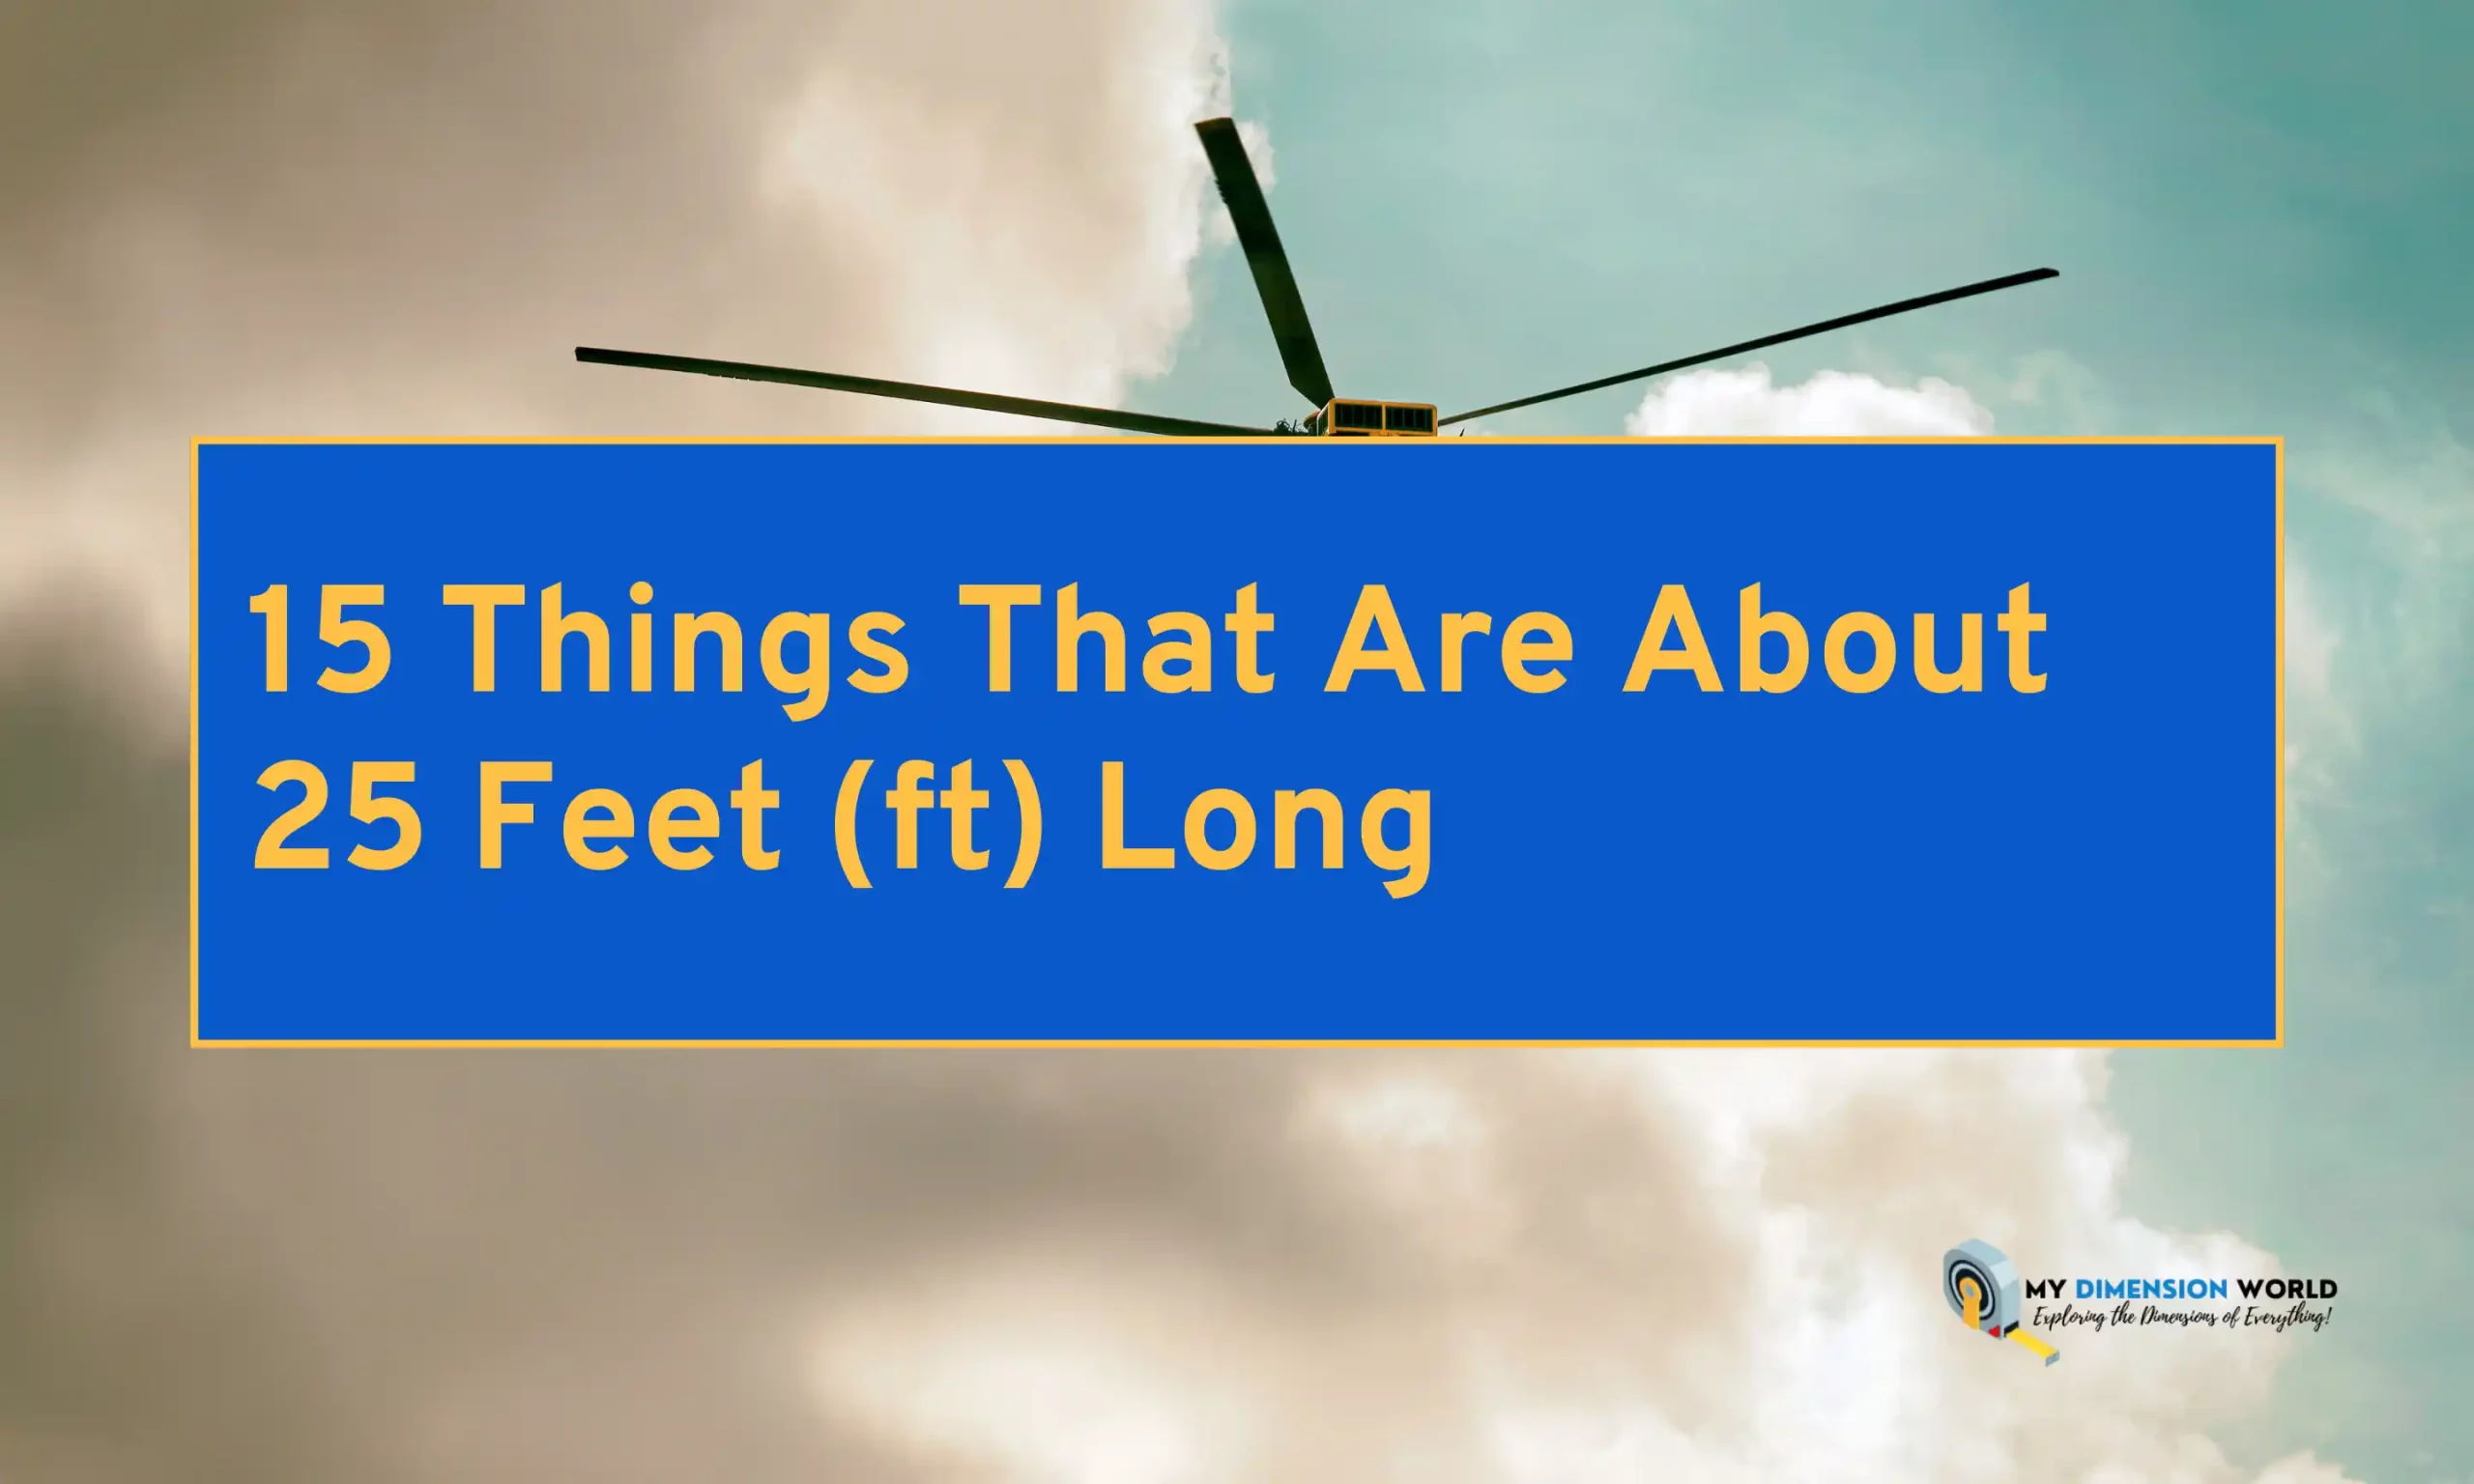 15 Things That Are About 25 Feet (ft) Long